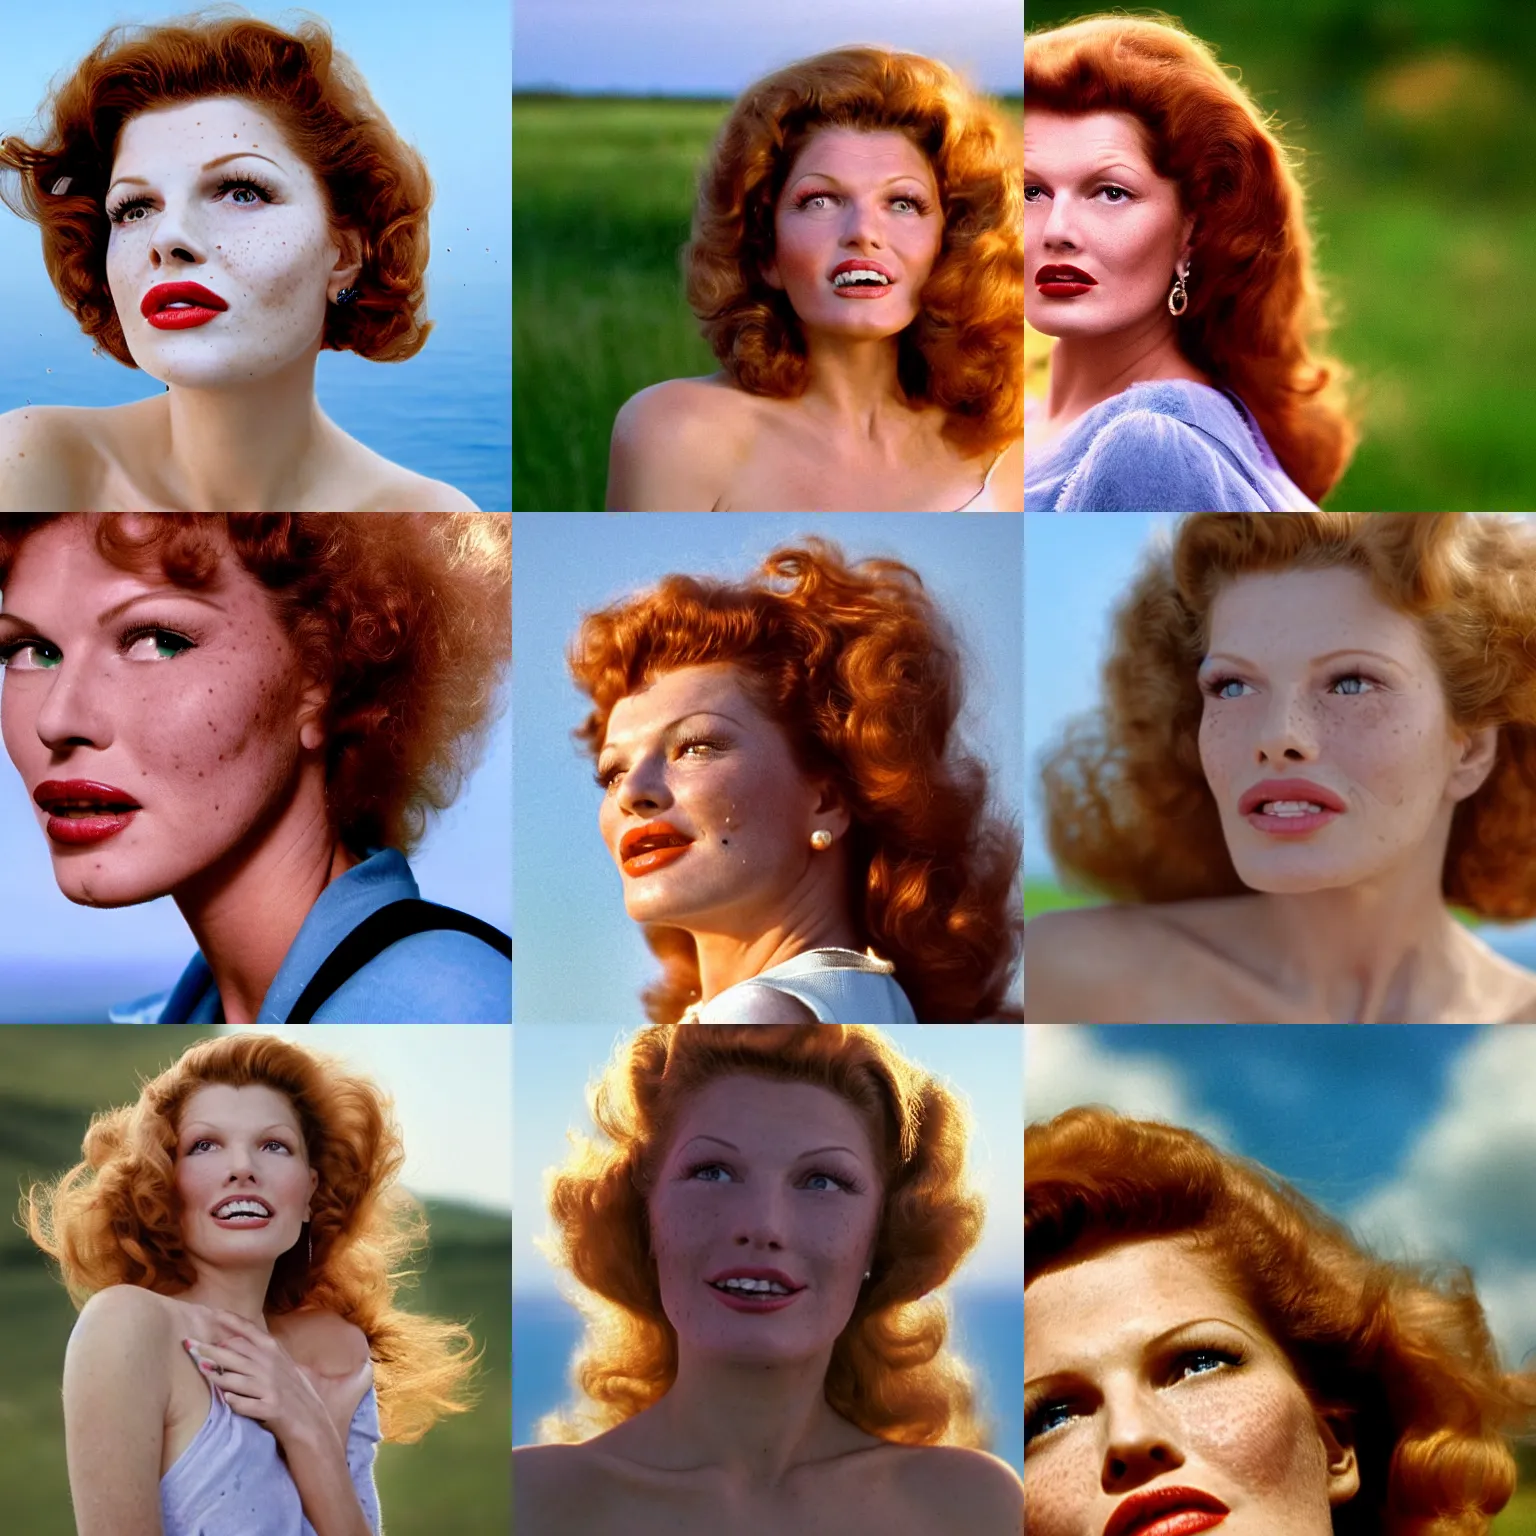 Prompt: natural 8 k close up shot from a 2 0 0 5 romantic comedy by sam mendes of rita hayworth with freckles, natural skin and beauty spots. she stands and looks on the horizon with winds moving her hair. fuzzy blue sky in the background. no make - up, no lipstick, small details, wrinkles, natural lighting, 8 5 mm lenses, sharp focus